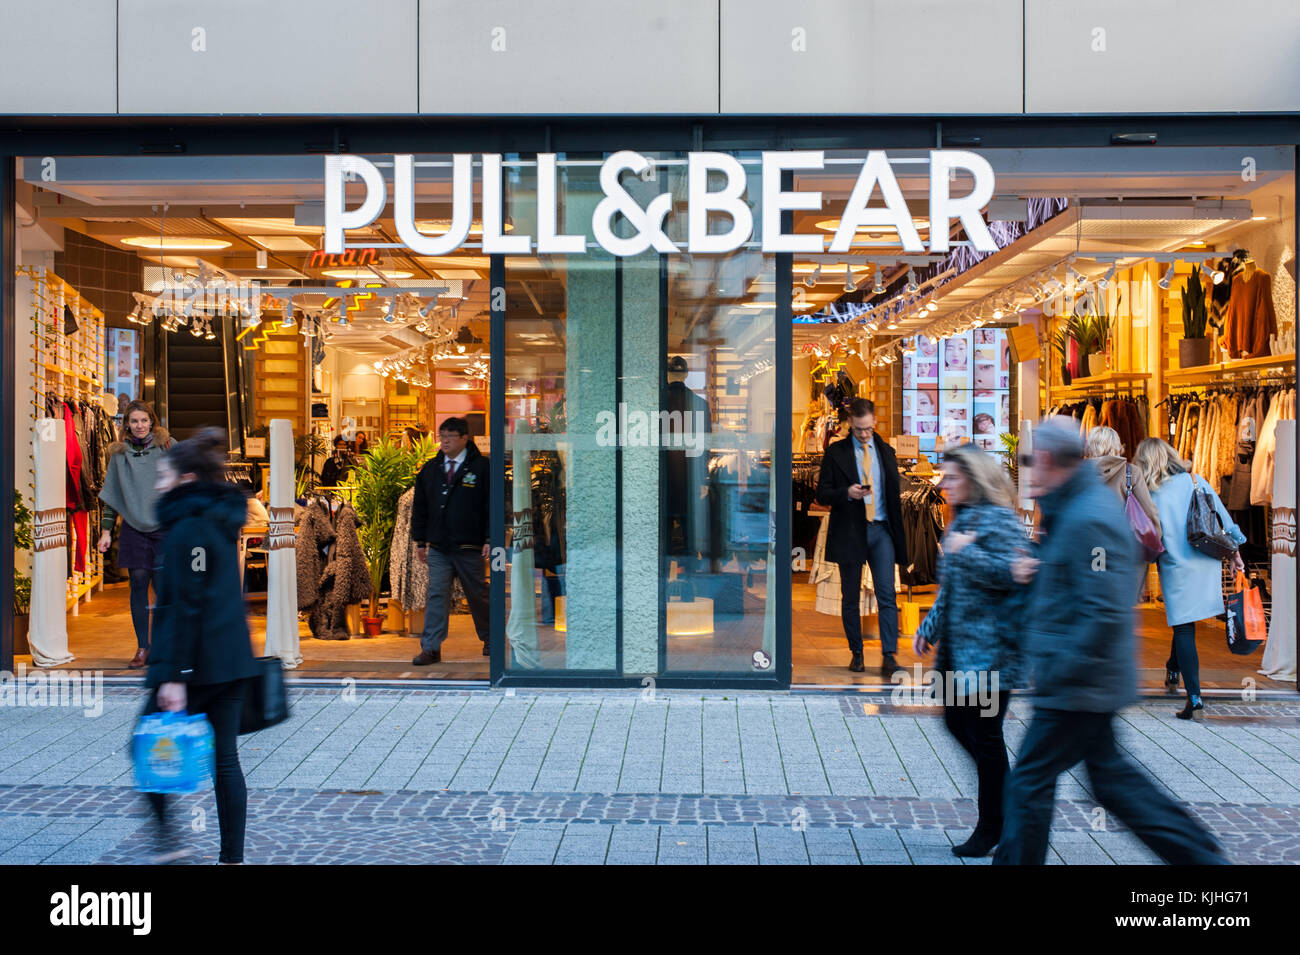 Pull & Bear clothing store in Luxembourg Stock Photo - Alamy